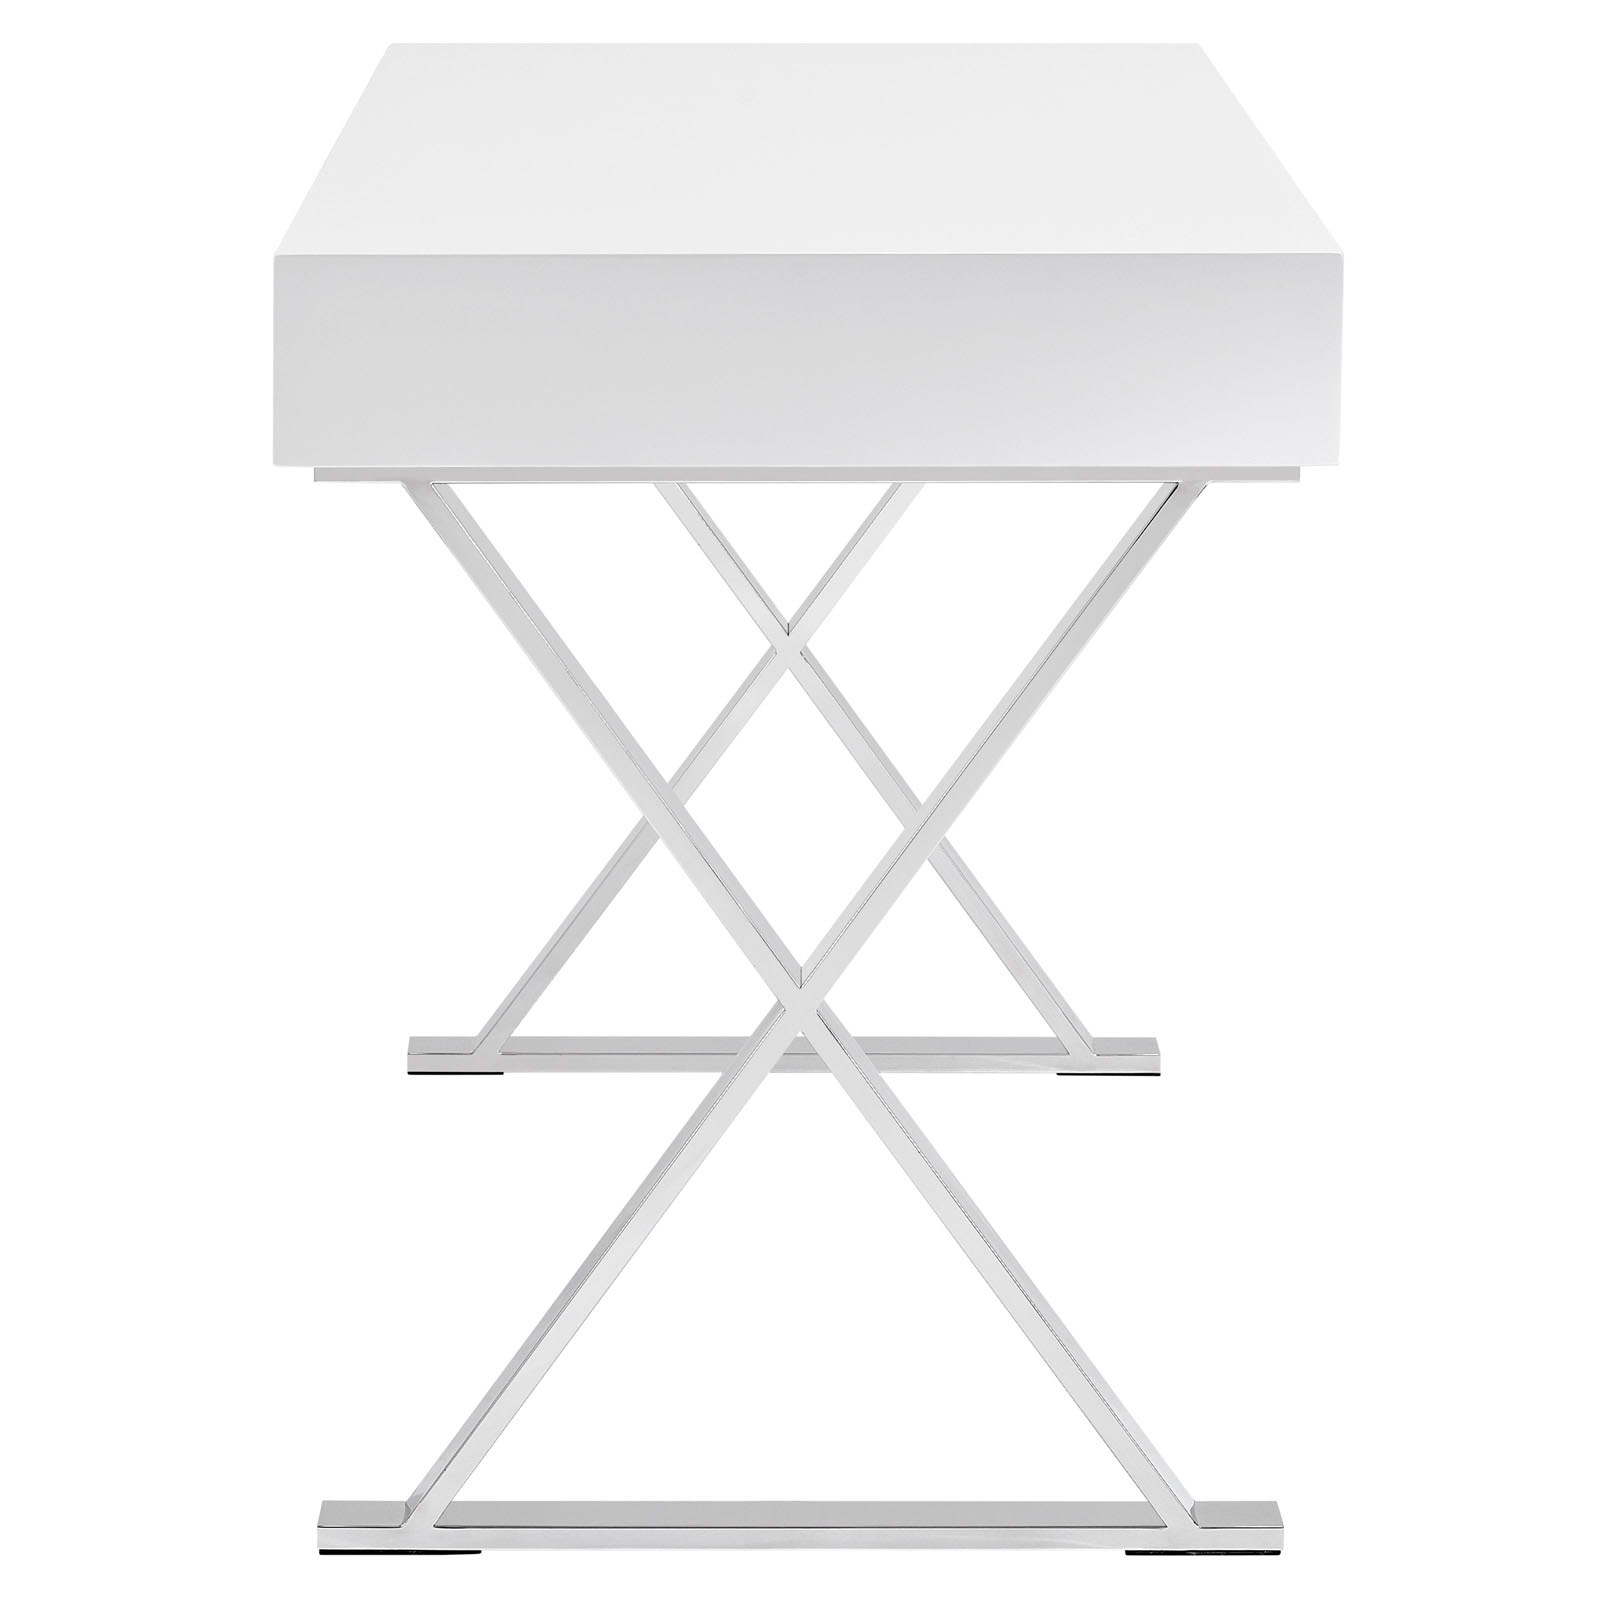 Space saving desk from Modway - Side View - Shown in White